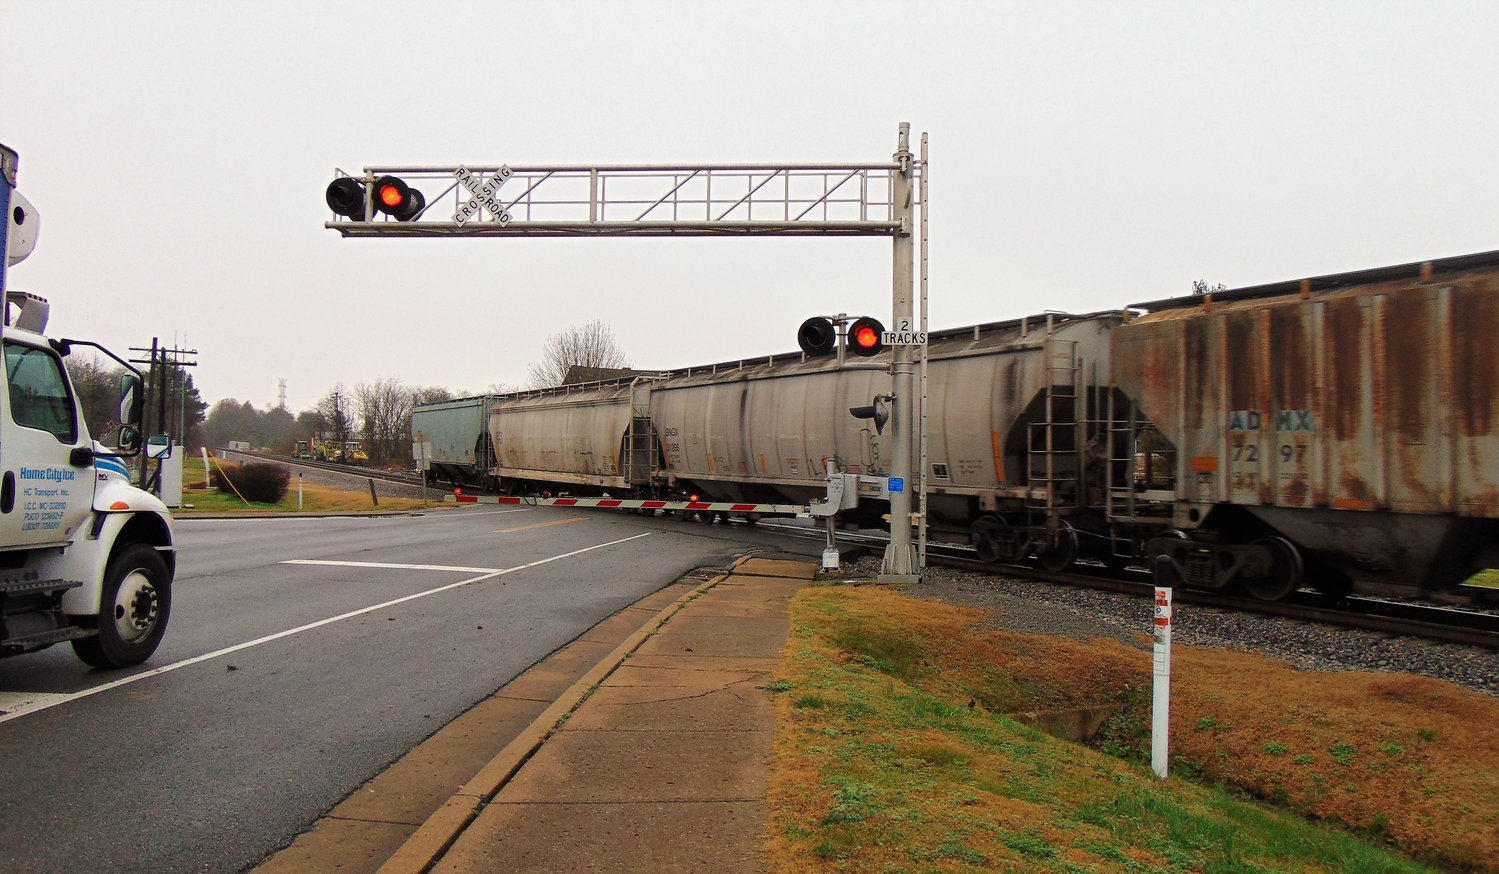 “The train is our challenge,” said Wartrace Mayor Cindy Drake about planning development. And as CSX does
more rail service, it gets worse, she added